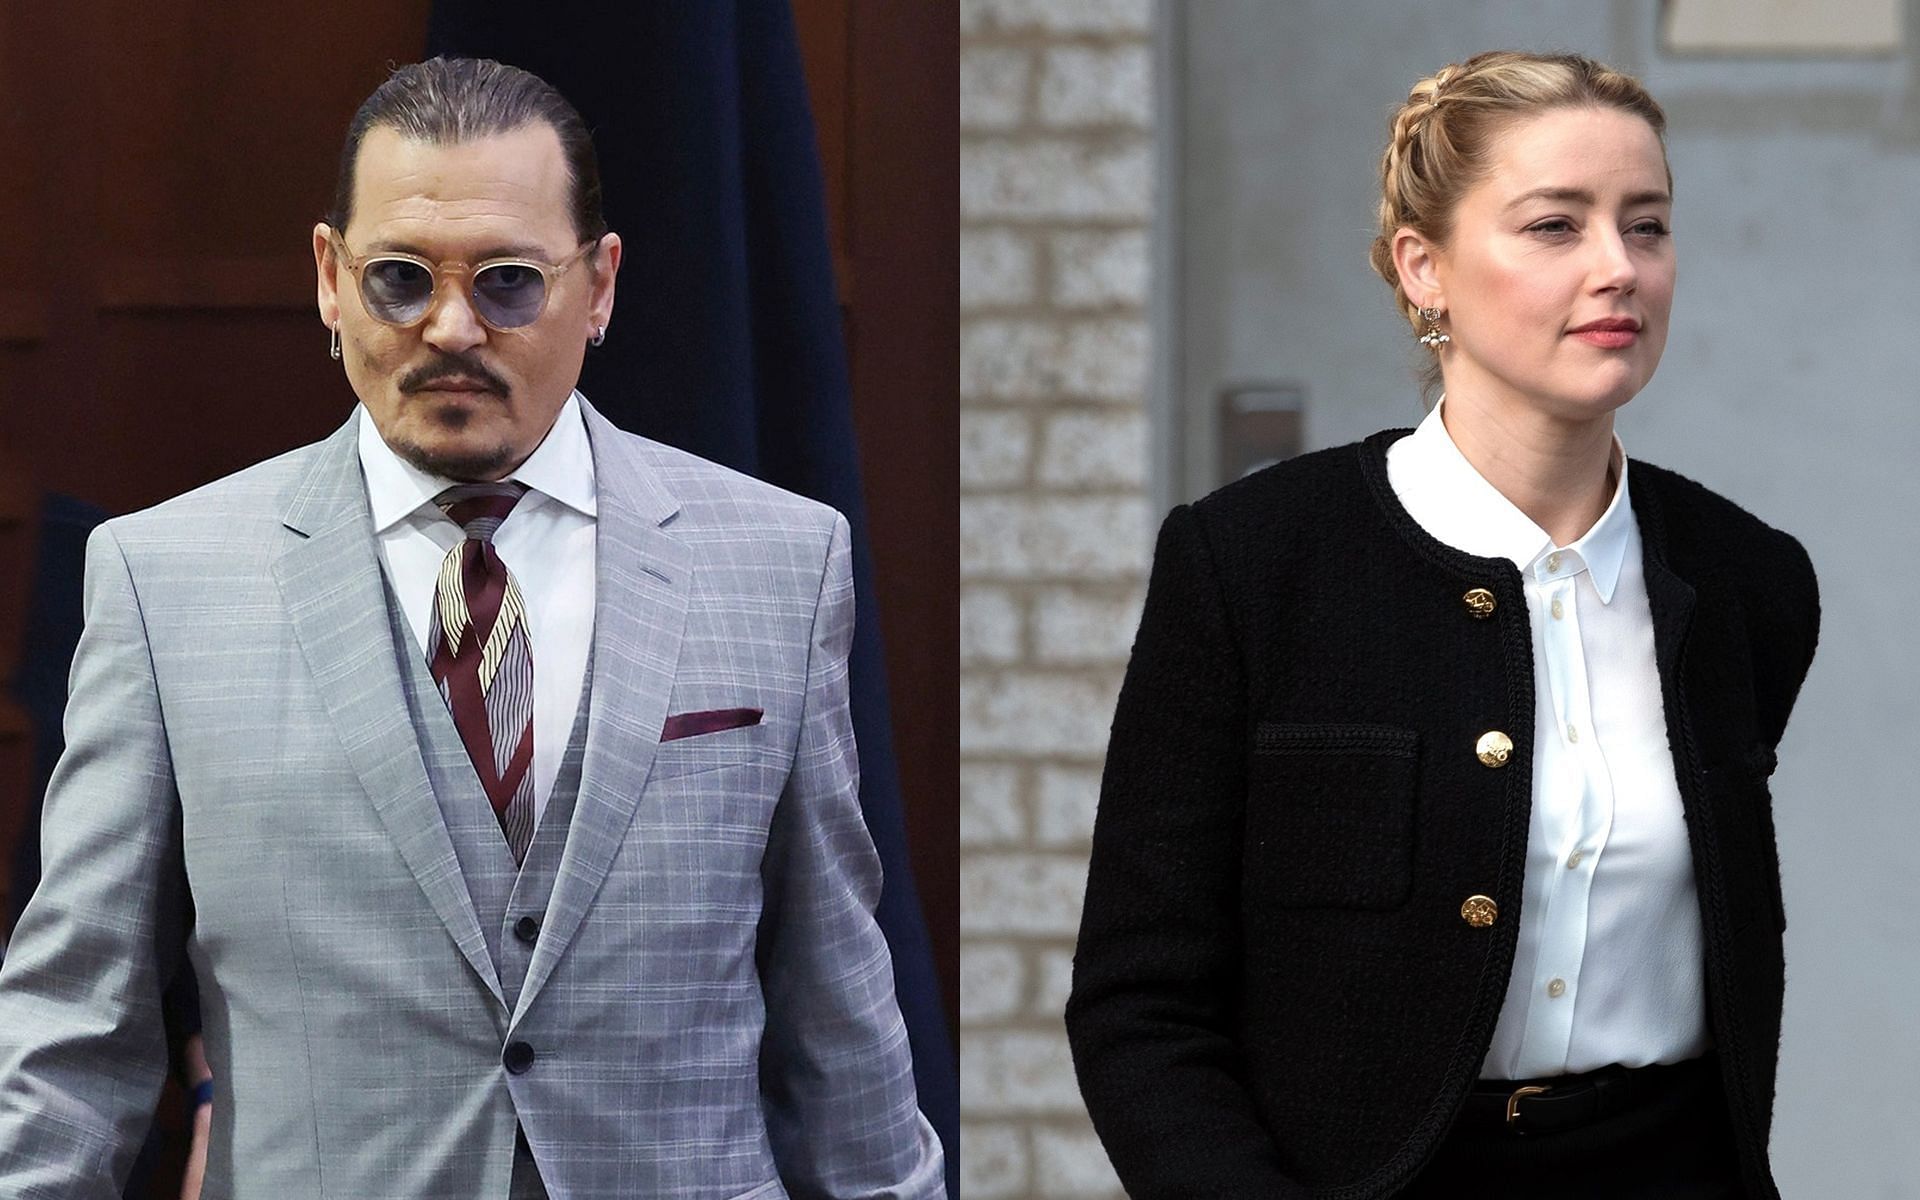 The court session of the Johnny Depp vs. Amber Heard trial will resume on Friday, May 27, 2022, at 9.00 a.m. ET. (Images via Getty Images)